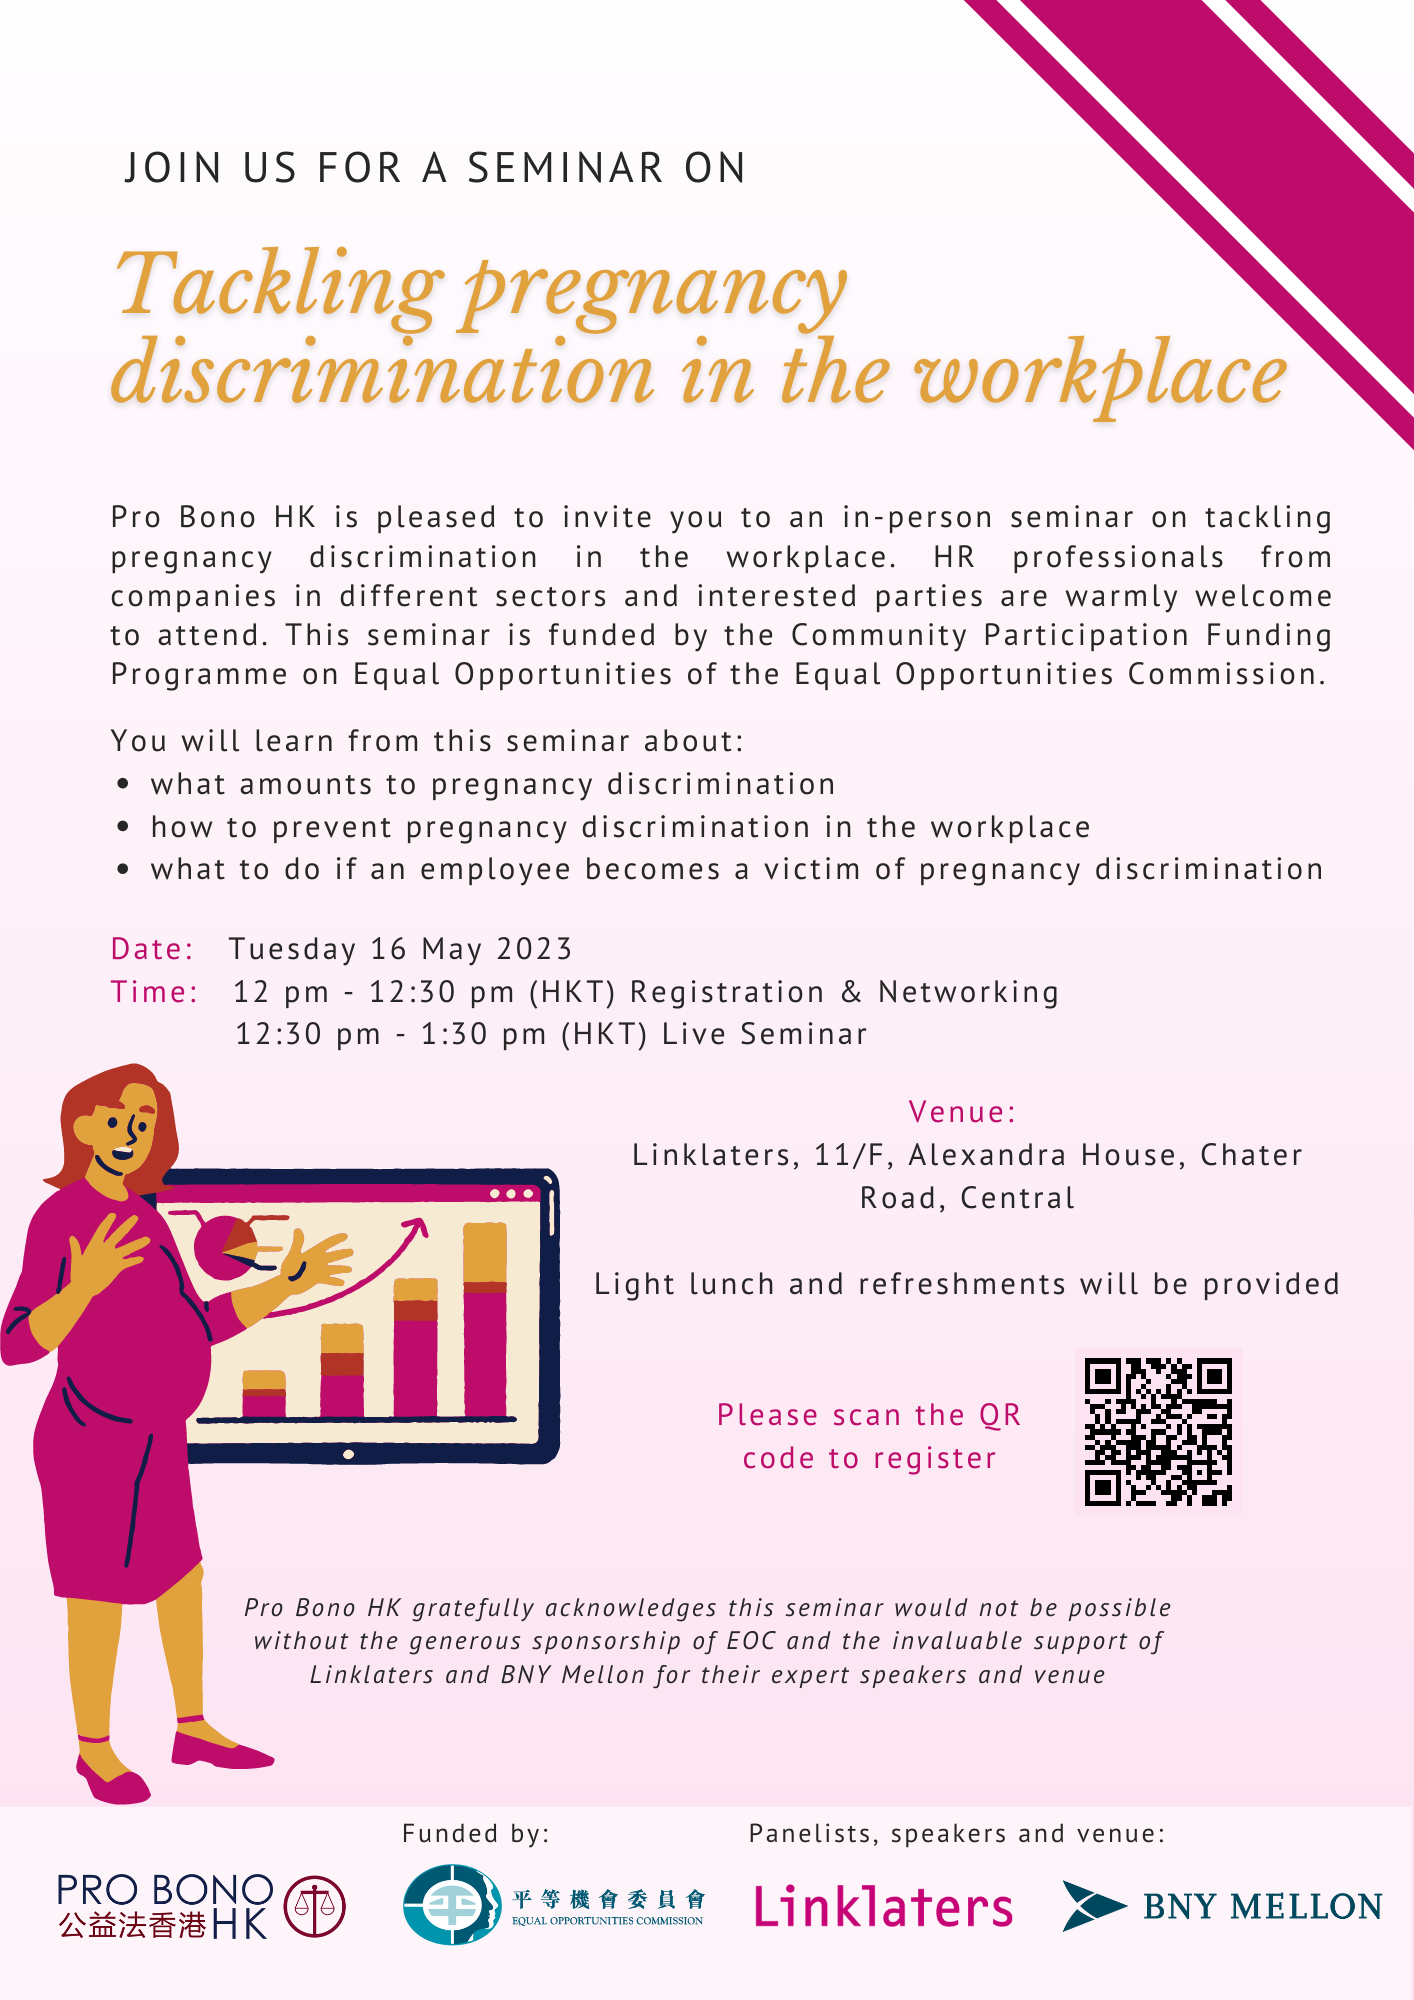 Pro Bono HK to organise seminar on tackling pregnancy discrimination in the workplace